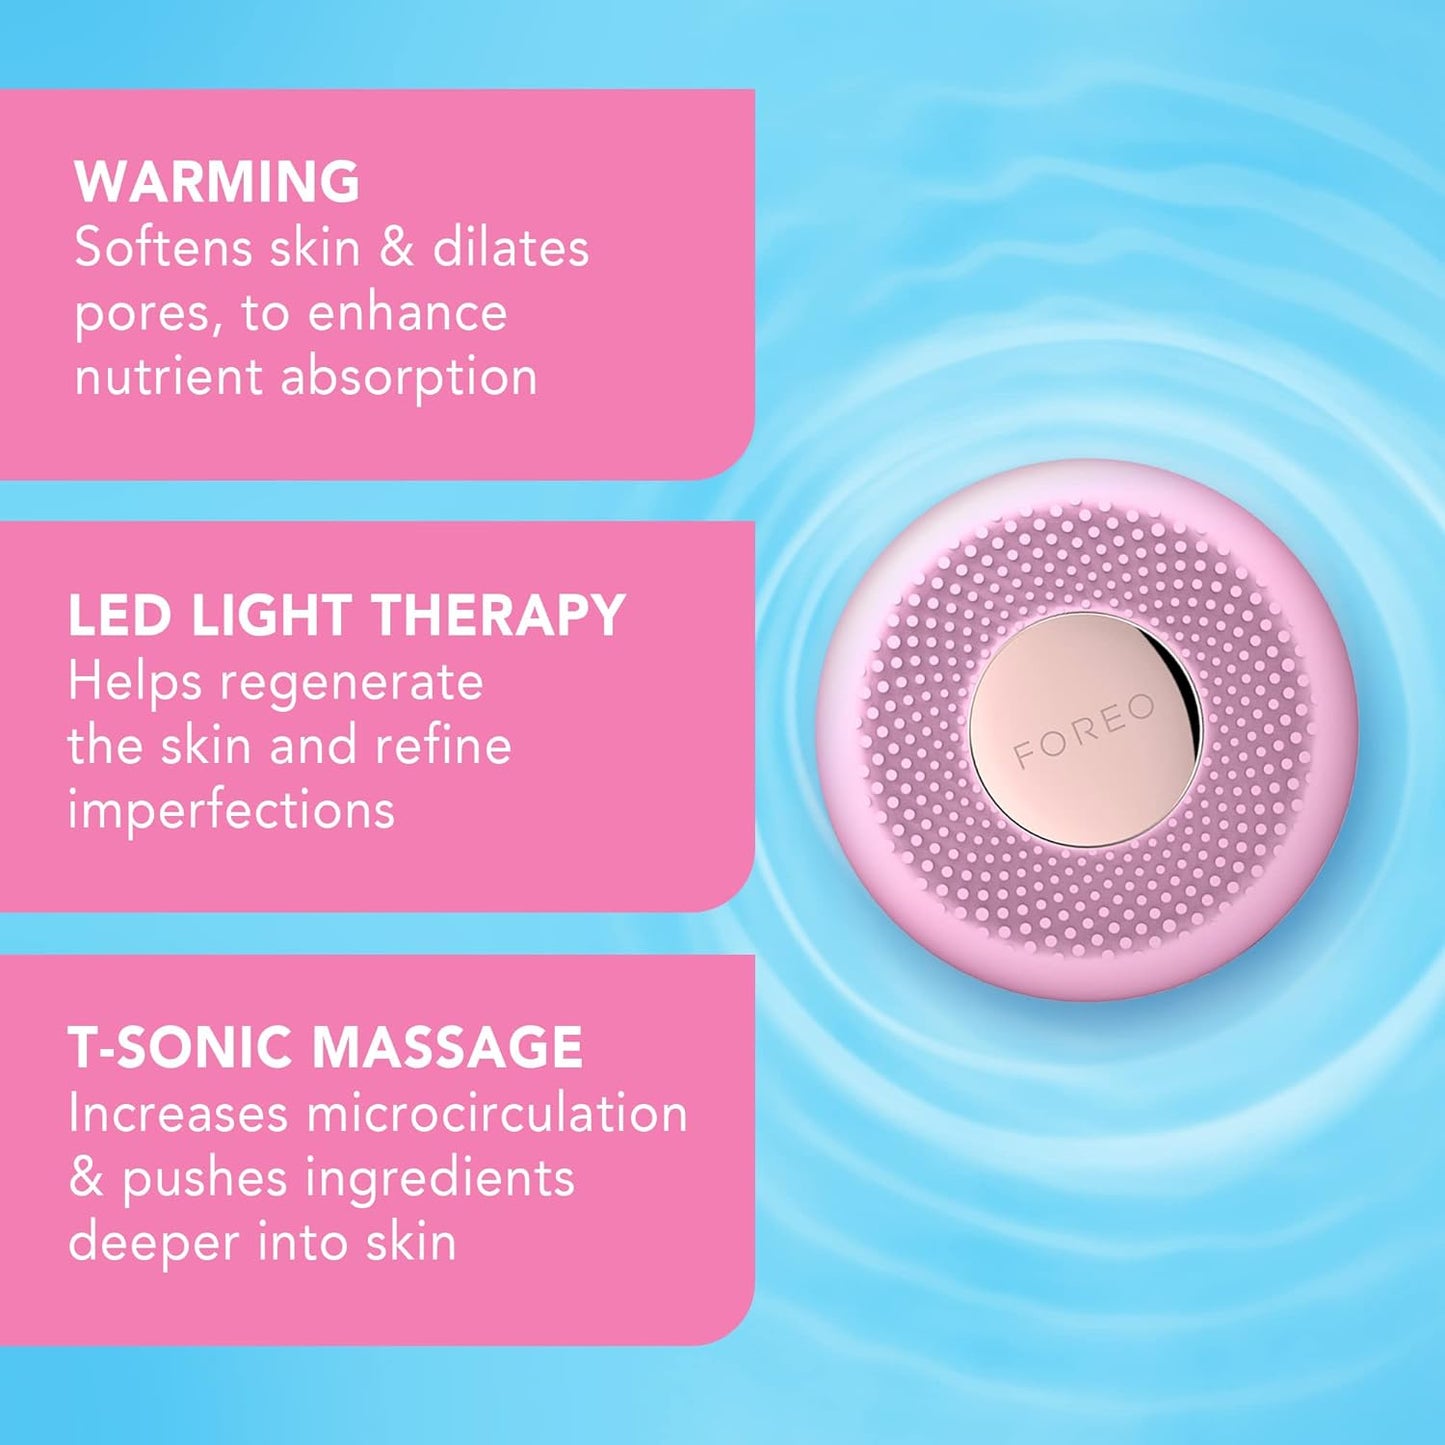 Foreo Ufo Mini Full Facial Led Mask Treatment, Red Light Therapy, Face Masks Beauty Treatment, Korean Skincare, Thermotherapy & Face Massager, Moisturiser, Increased Skin Care Absorption, Pearl Pink